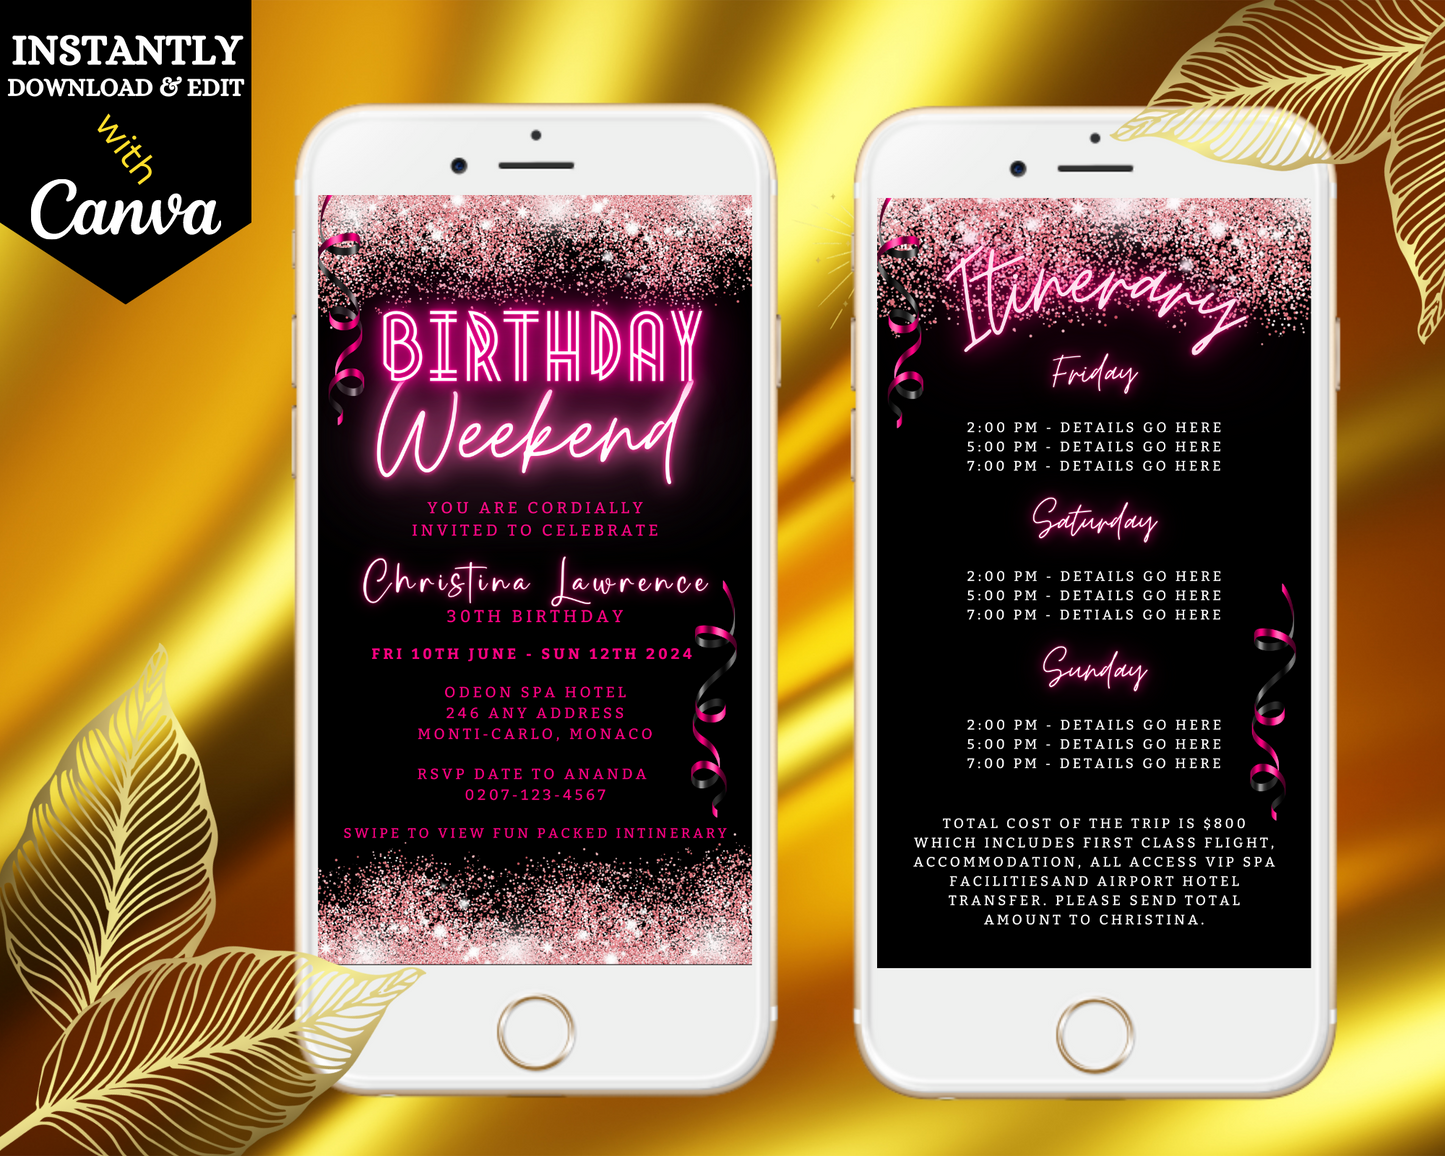 Neon Pink Glitter Confetti Weekend Party Evite displayed on smartphones, showcasing customizable event details with editable text via Canva. Download and share electronically.